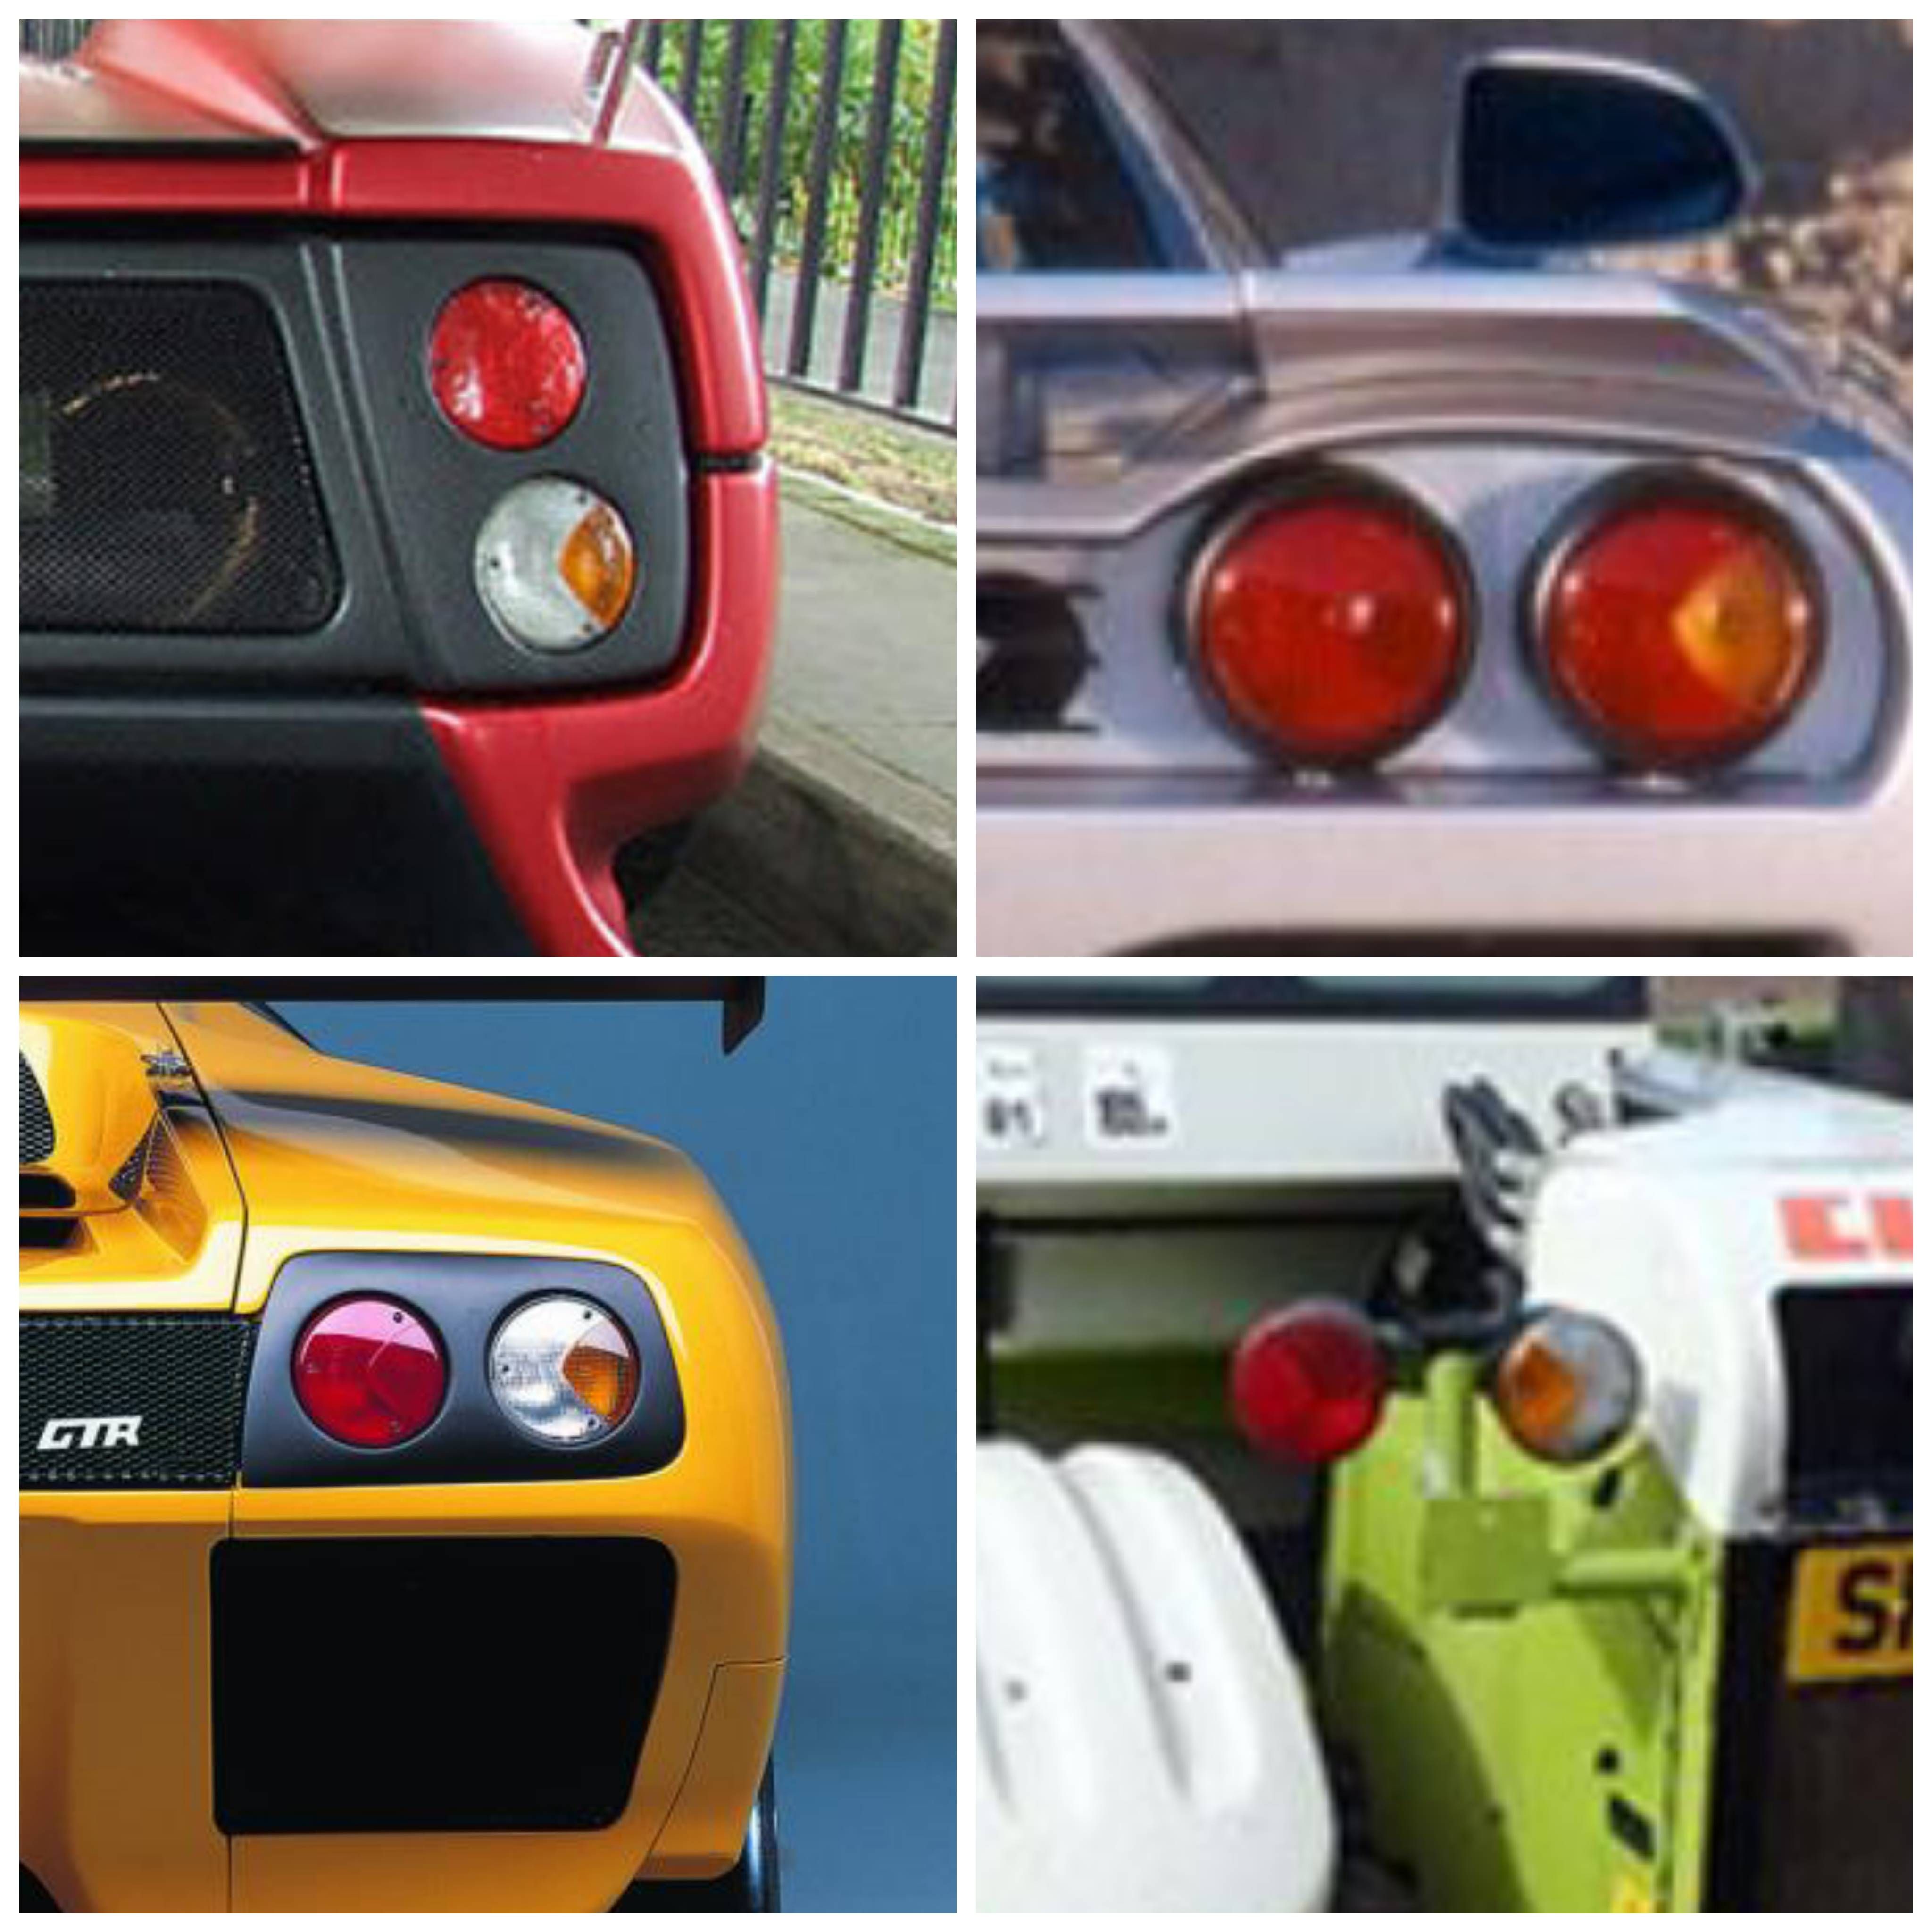 Hella 4169 Series Tail Lights on Lambo Diablo, McLaren F1, Pagani Zonda, Saleen S7, Ford Think City, some Tractors, a couple of Fiats, and lots more